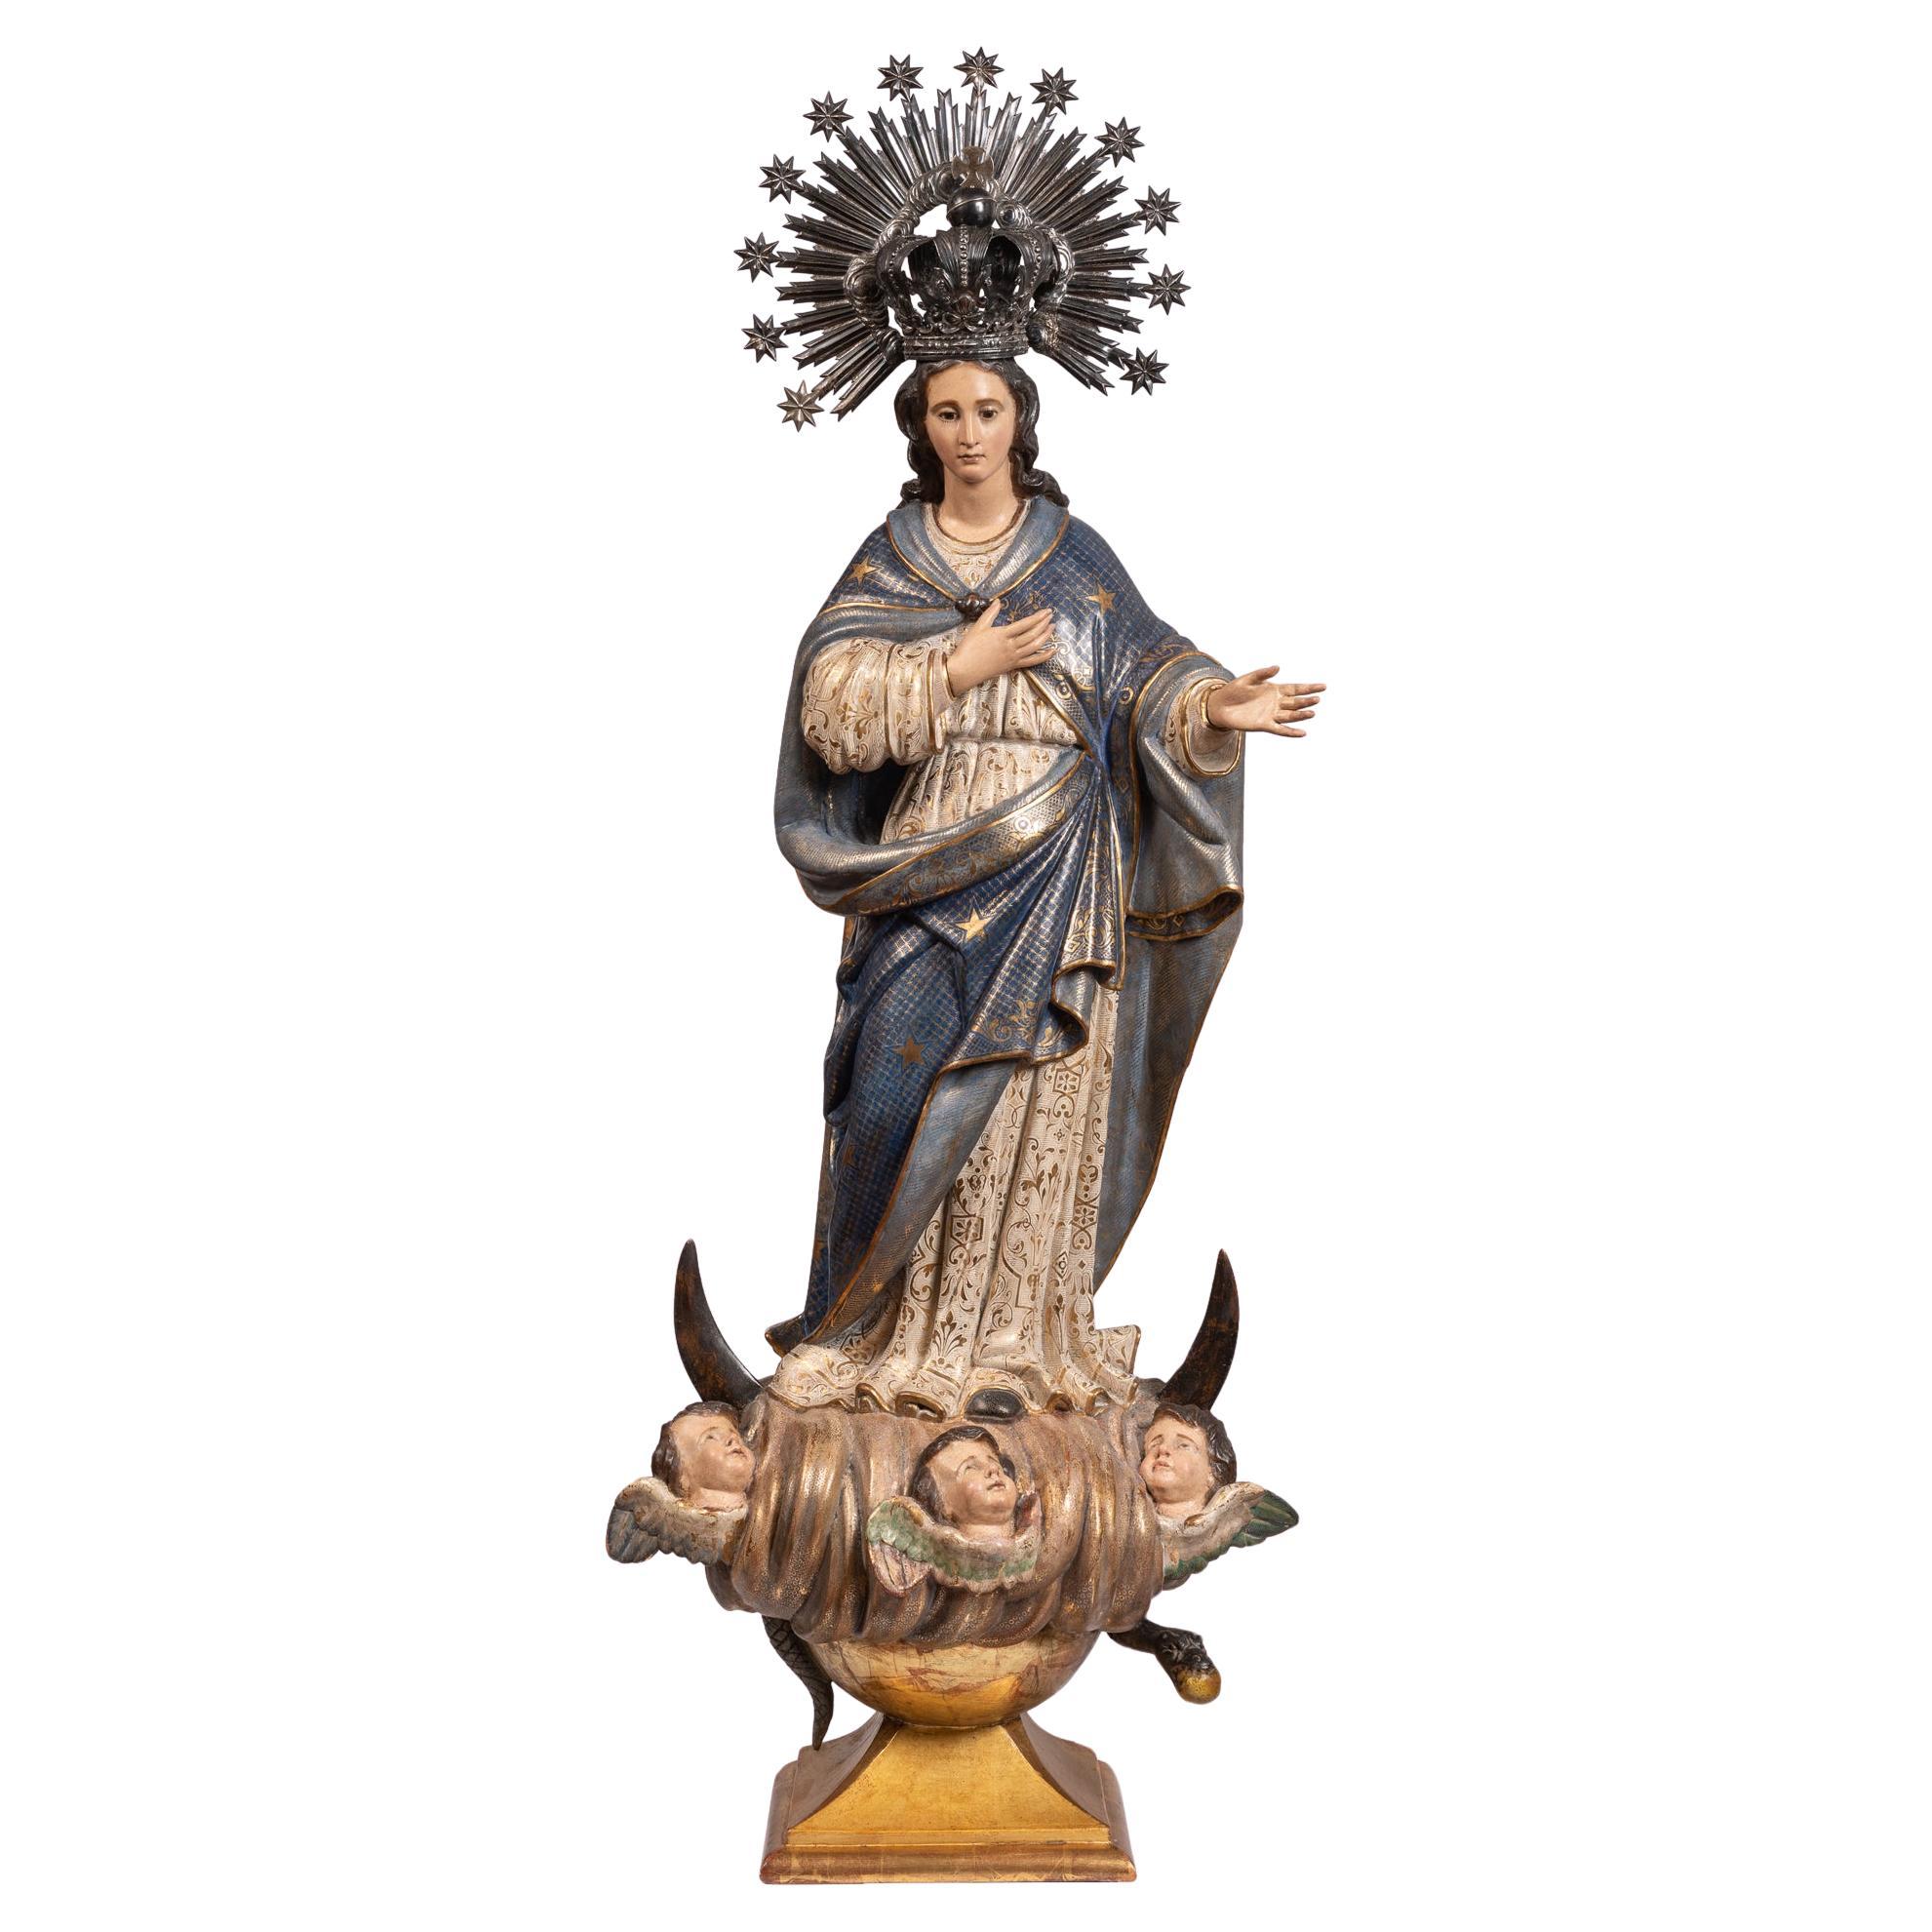 18th Century Spanish Virgin Mary of Immaculate Conception, Handcrafted Sculpture